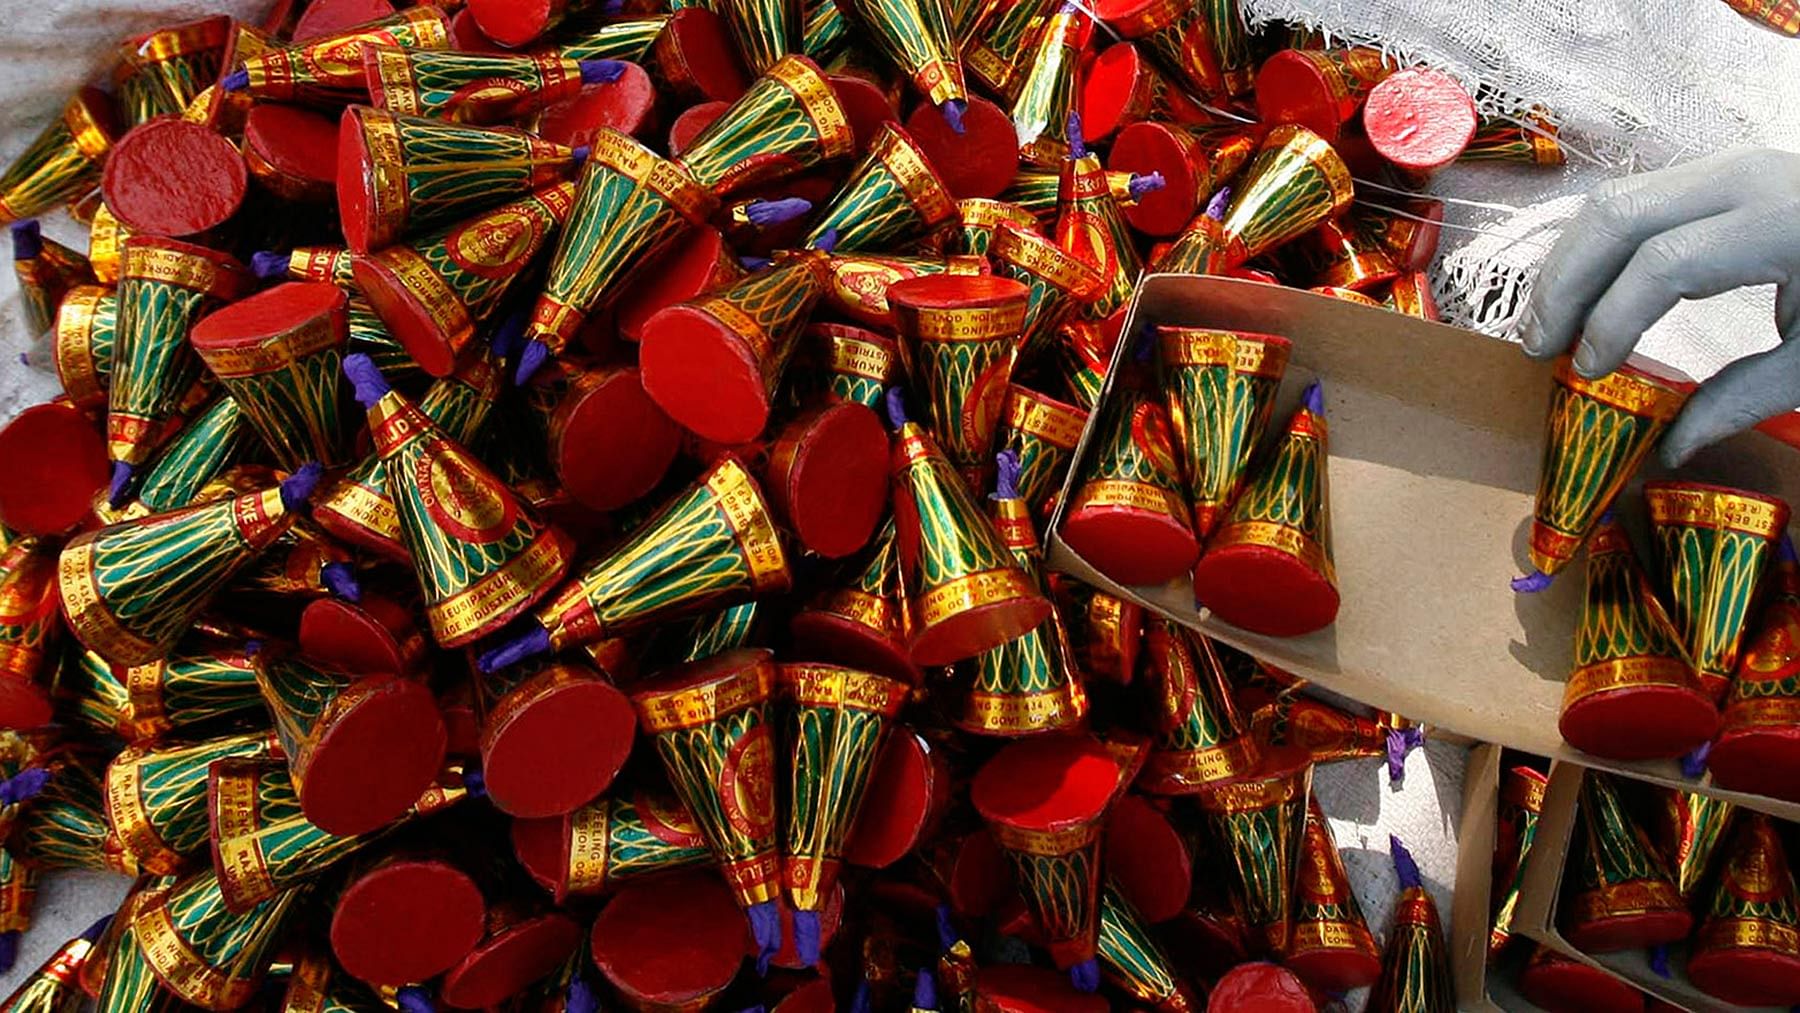 Popular firecrackers like <i>anar</i> (flower-pot) and <i>chakri</i> (spinning firecracker emit particulate matter 200 to 2,000 times the safe limits as designated by the WHO. (Photo: Reuters)